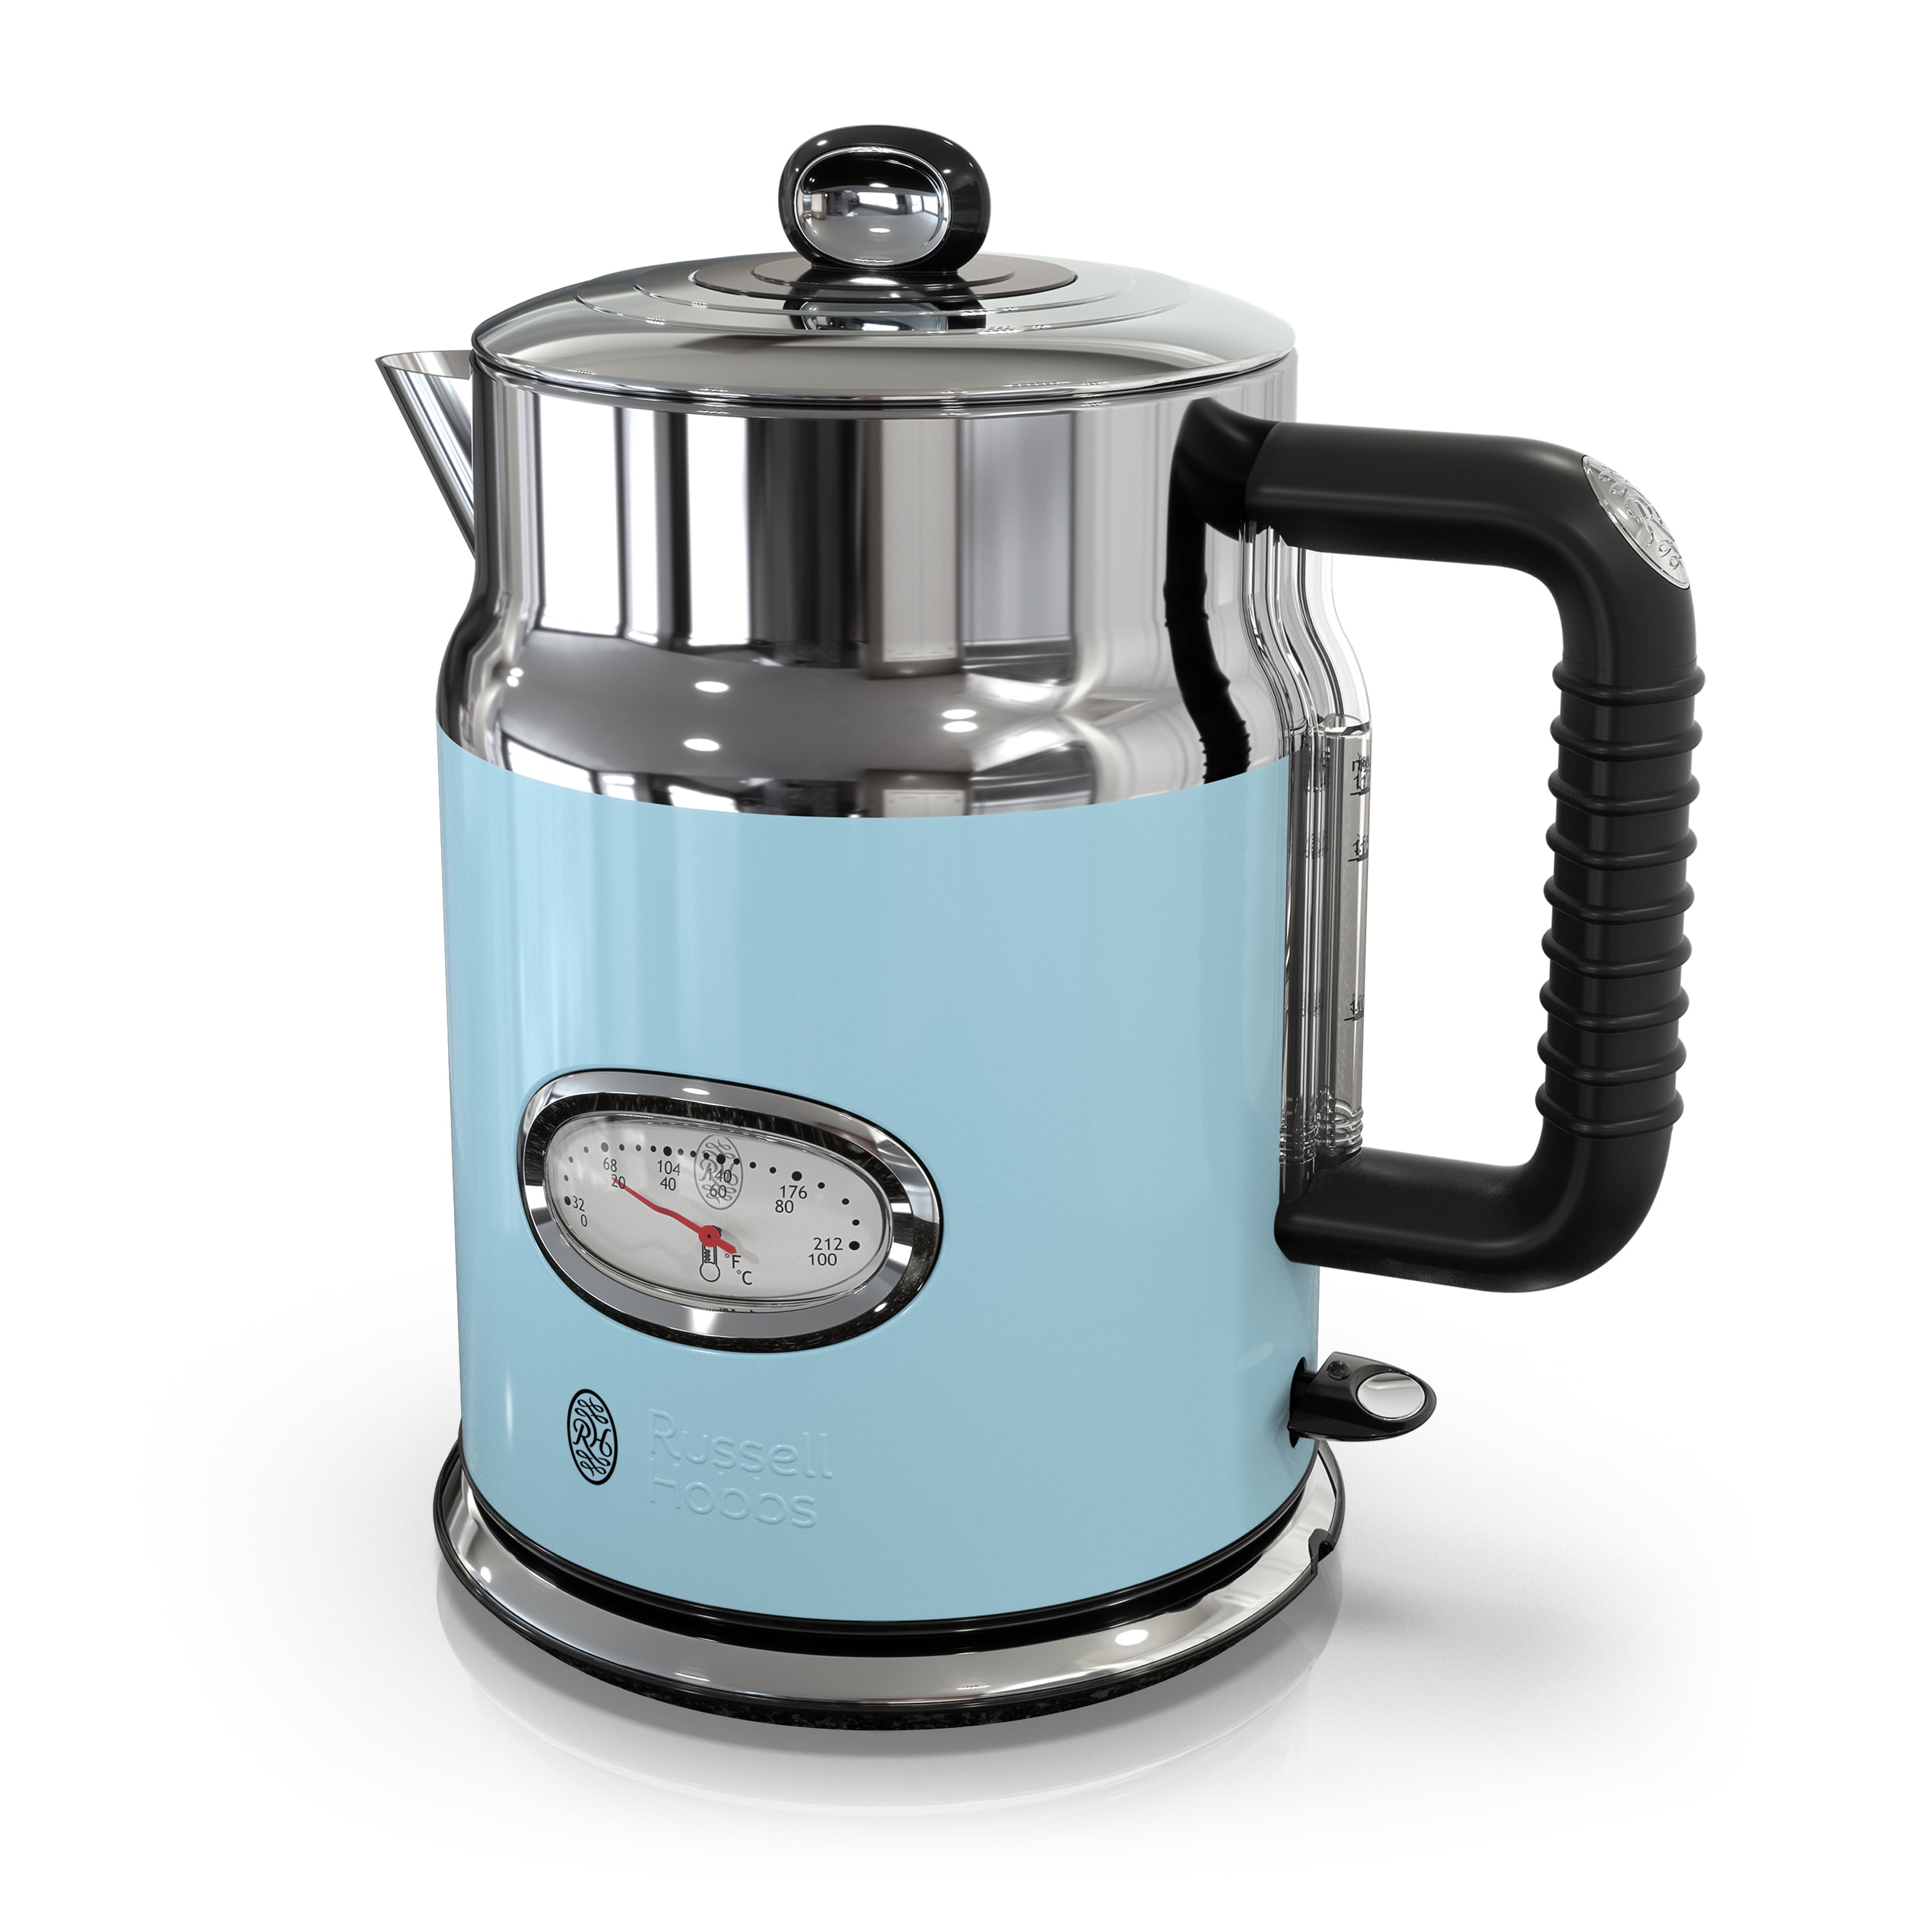 Retro Style Electric Kettle, Cream & Stainless Steel